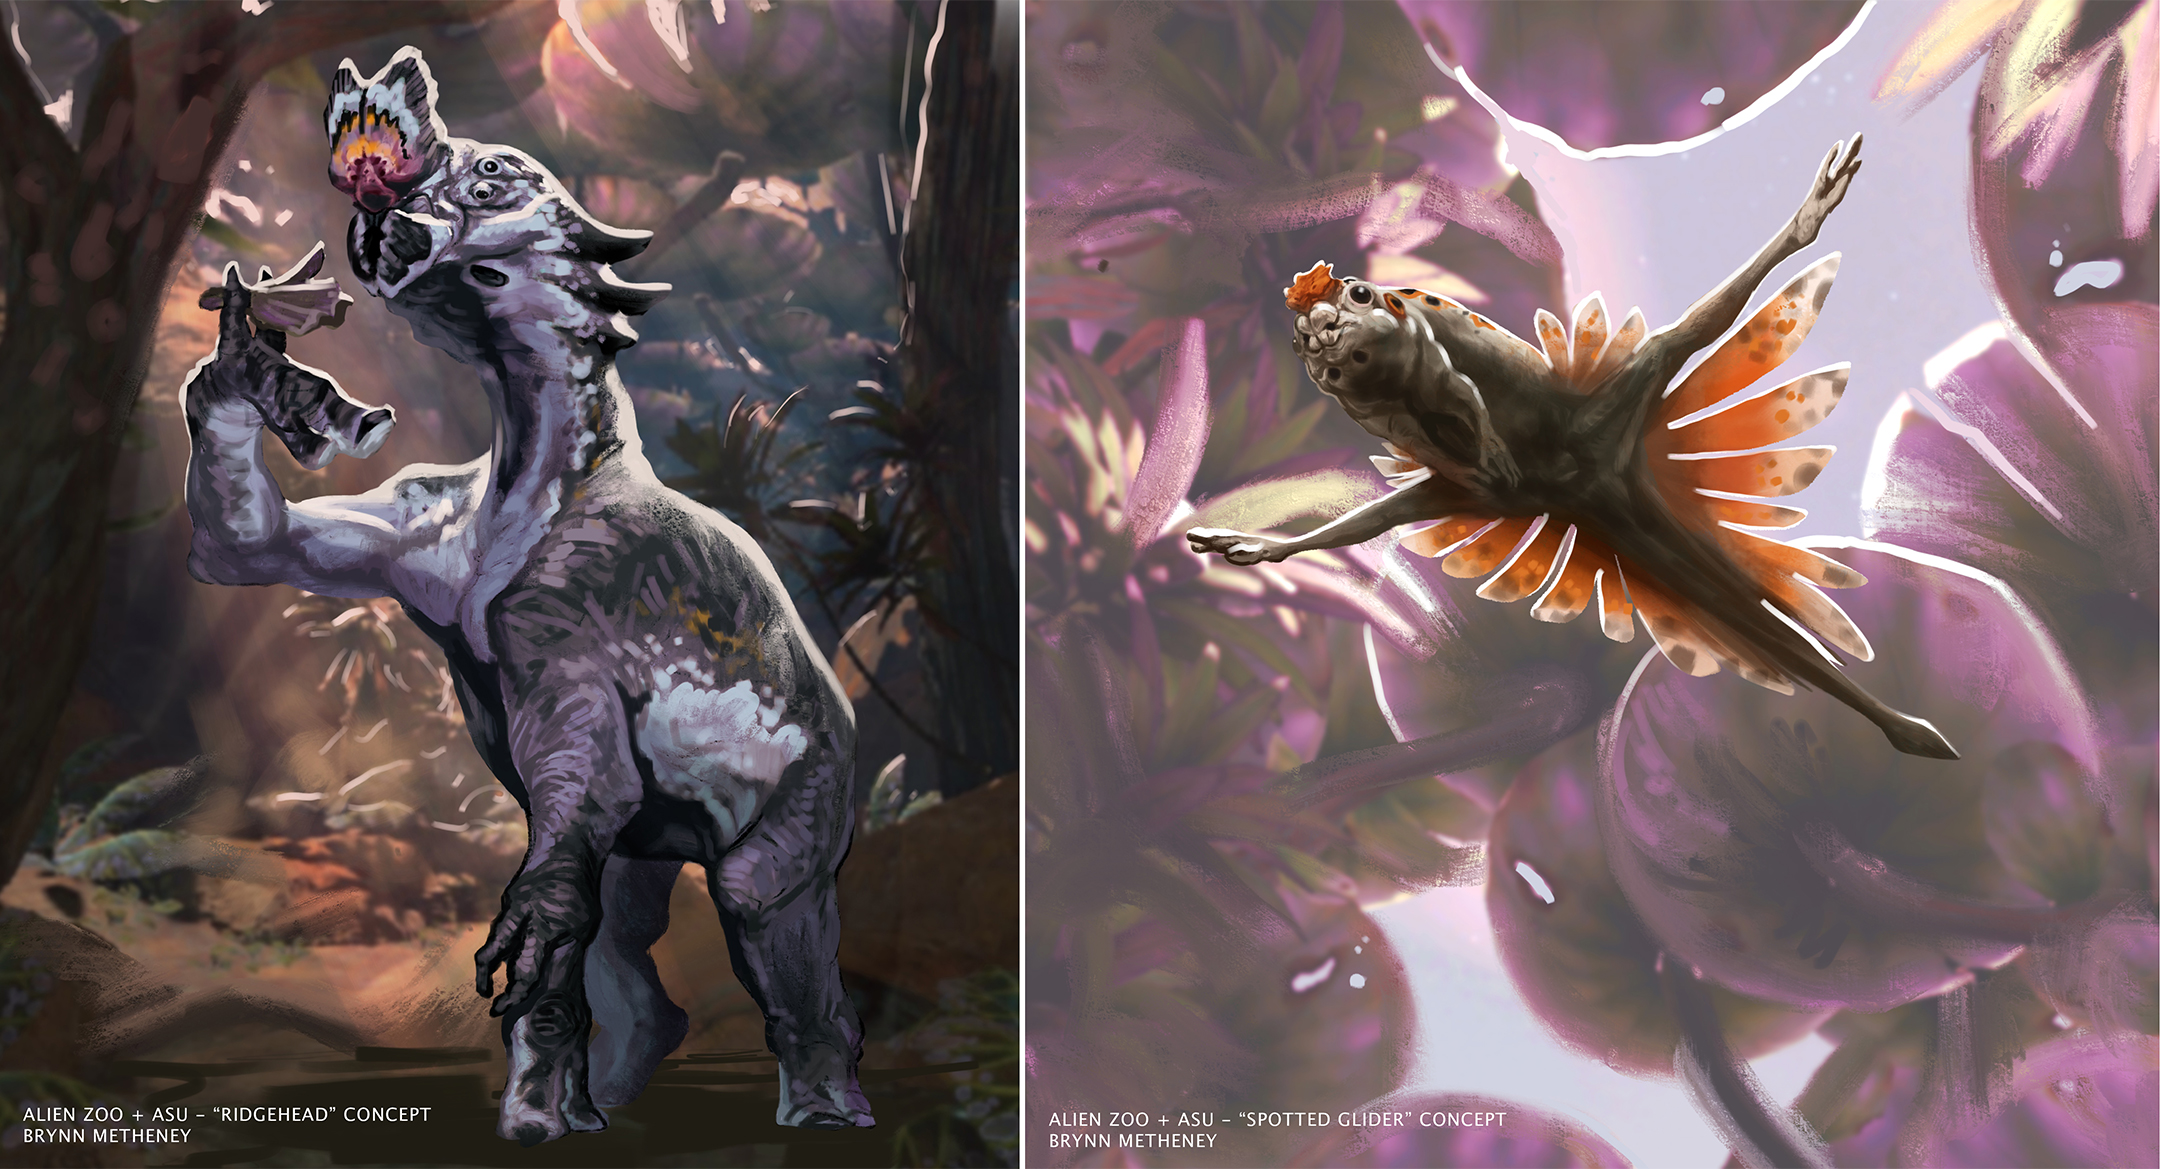 Two illustrations, side by side, of alien creatures, a dragon-like dinosaur on the left and a flying amphibian-like creature on the right